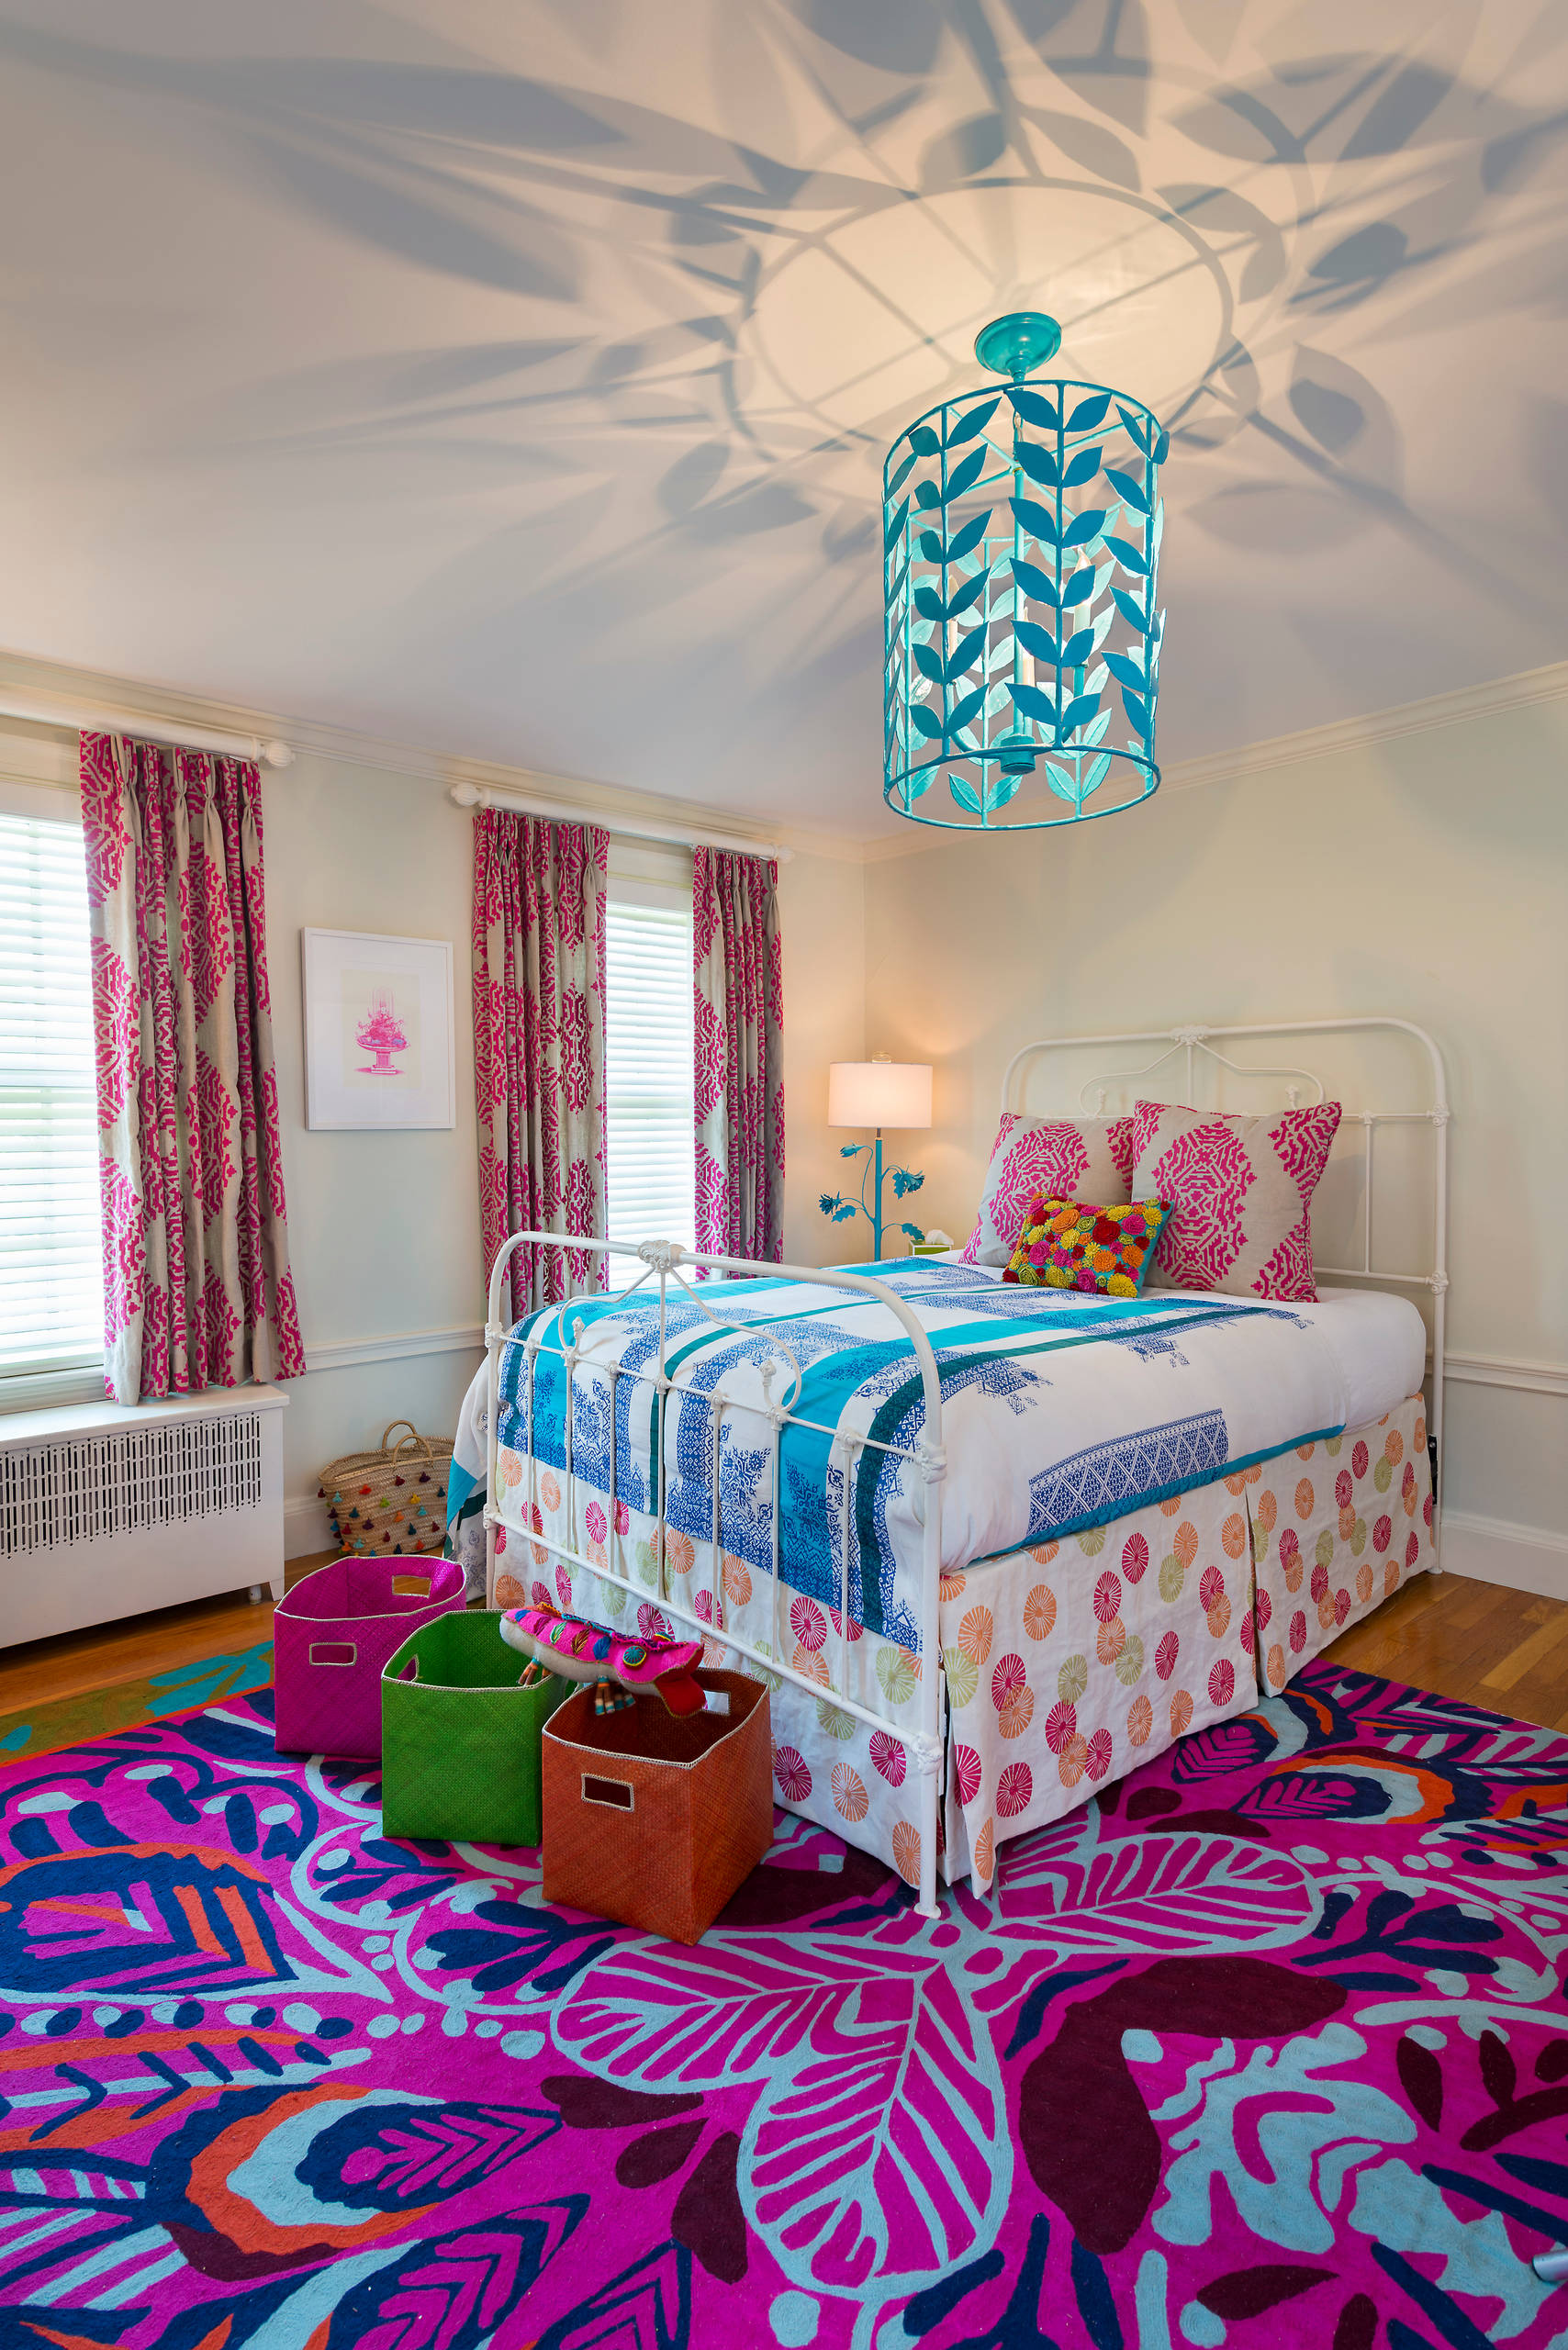 Kids' Rooms: How Can I Light a Child's Room Stylishly?